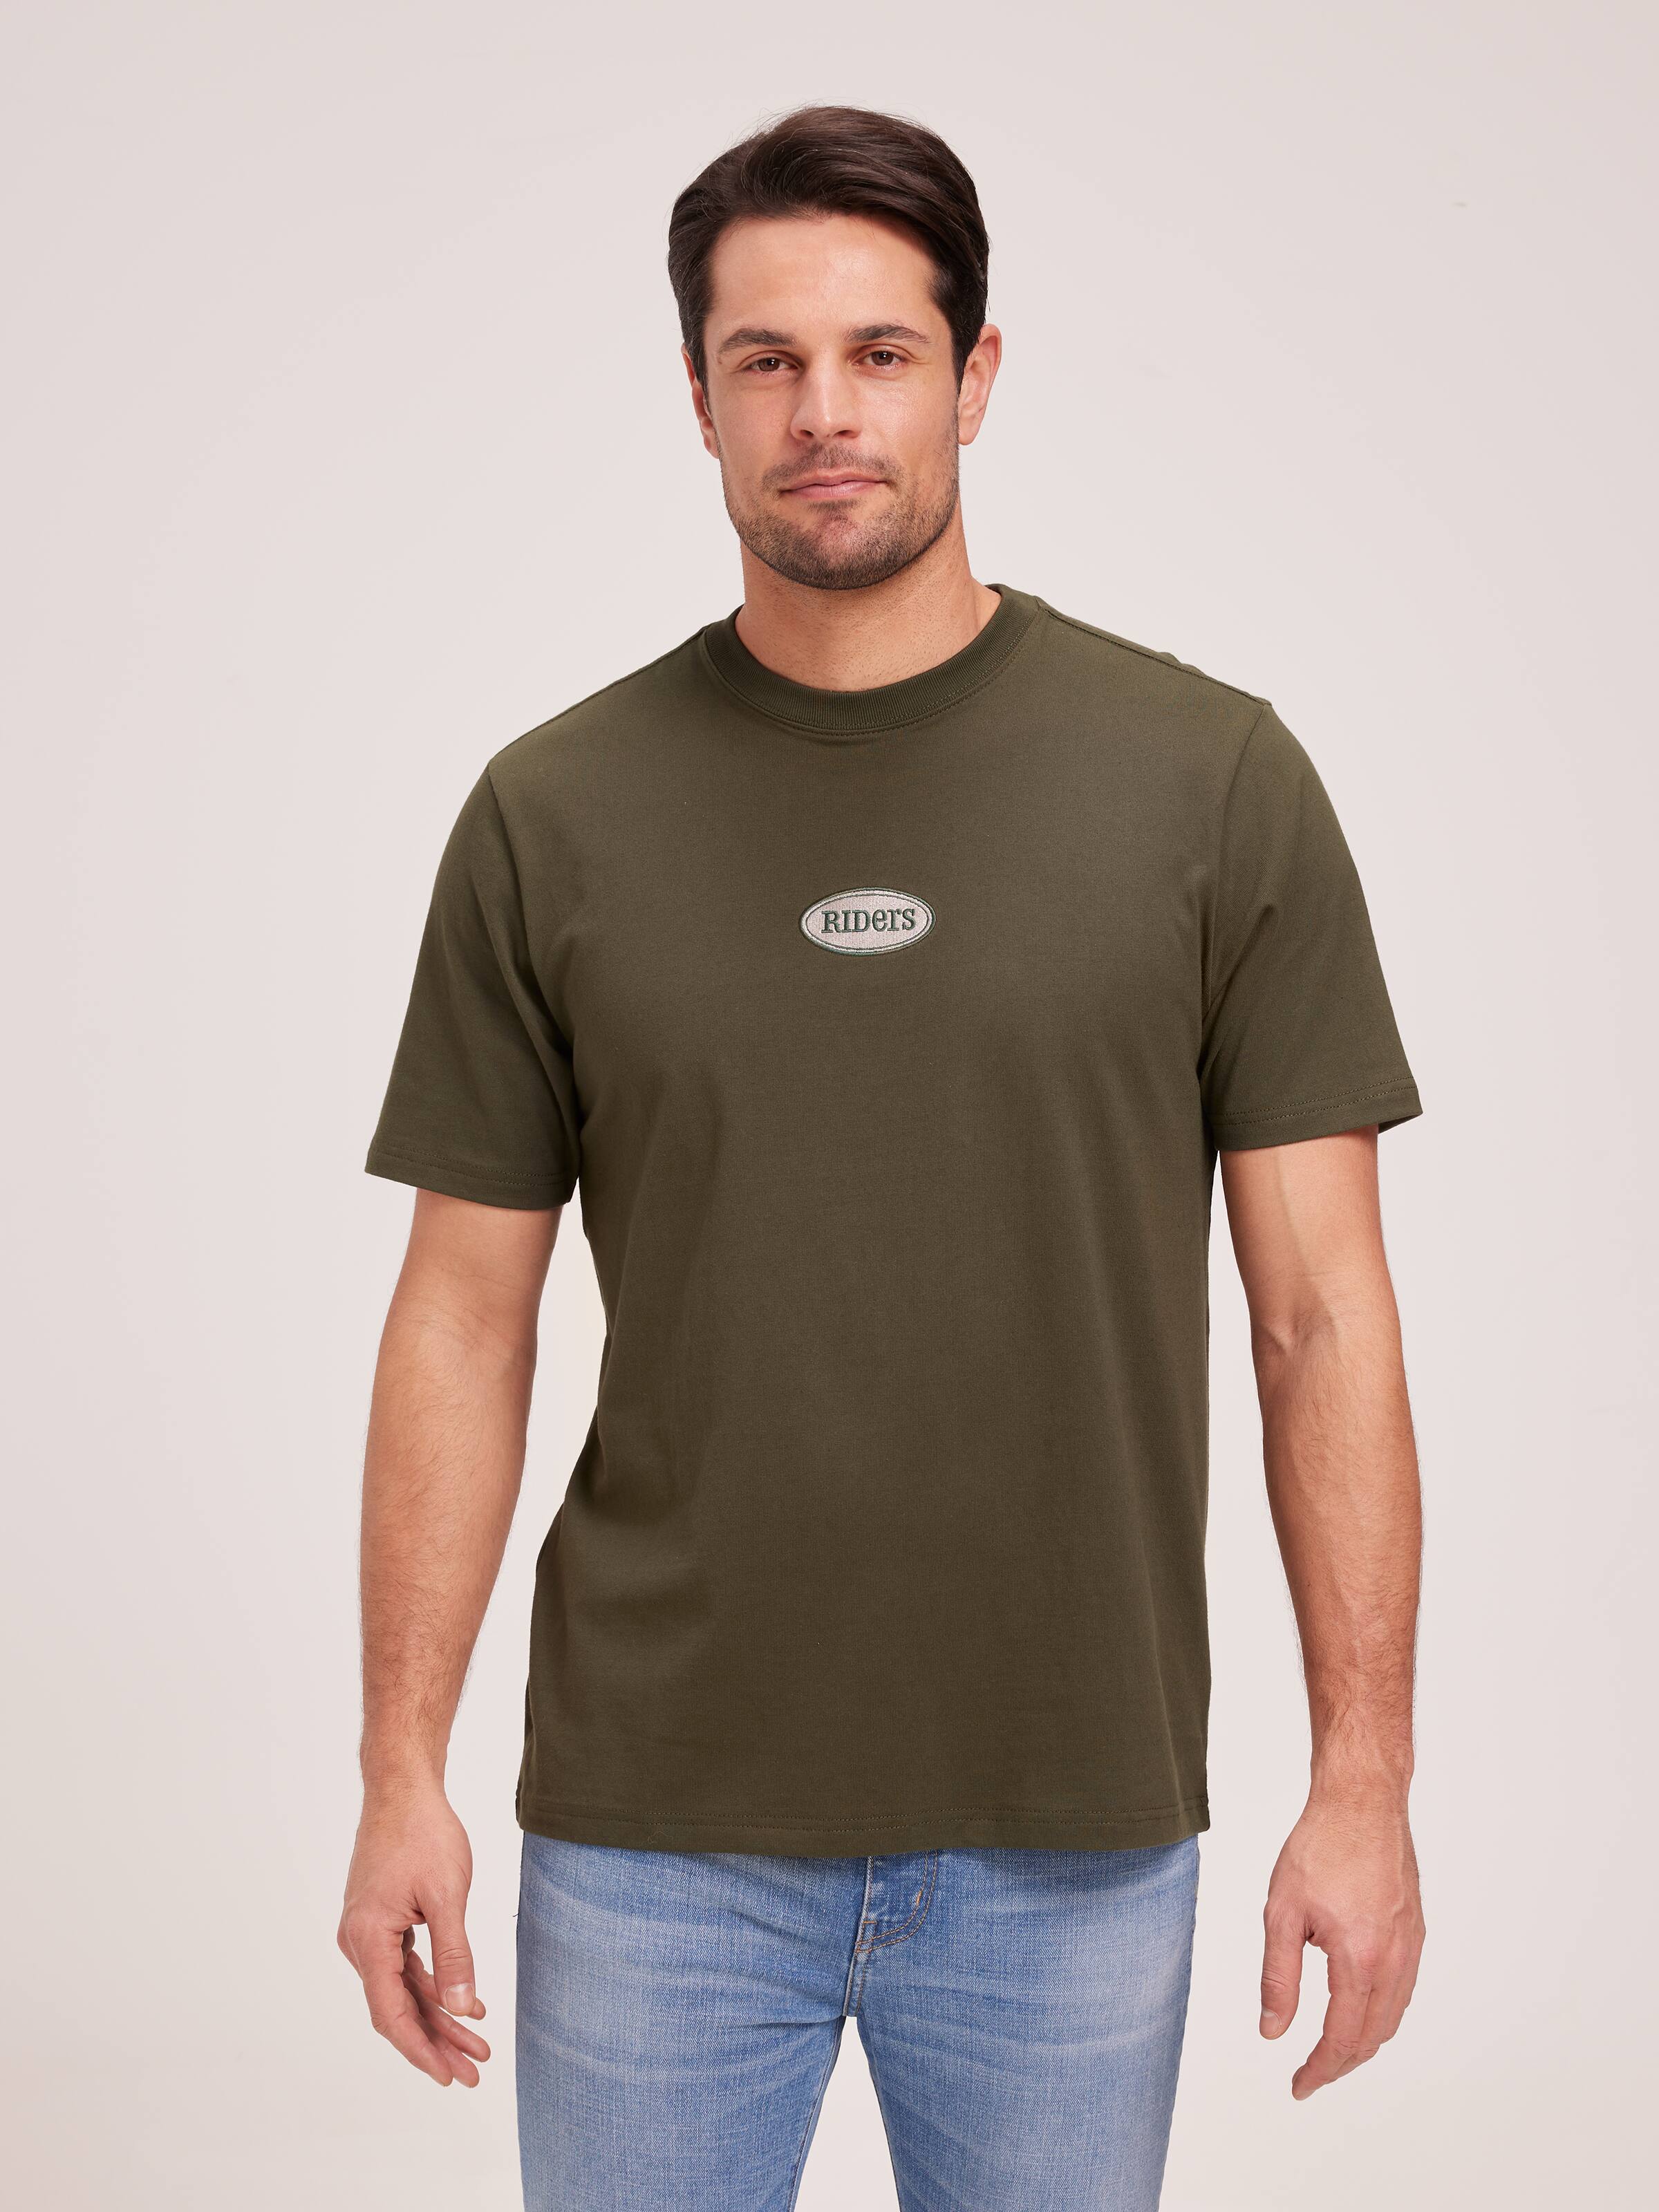 Oval Tee In Army Duffle